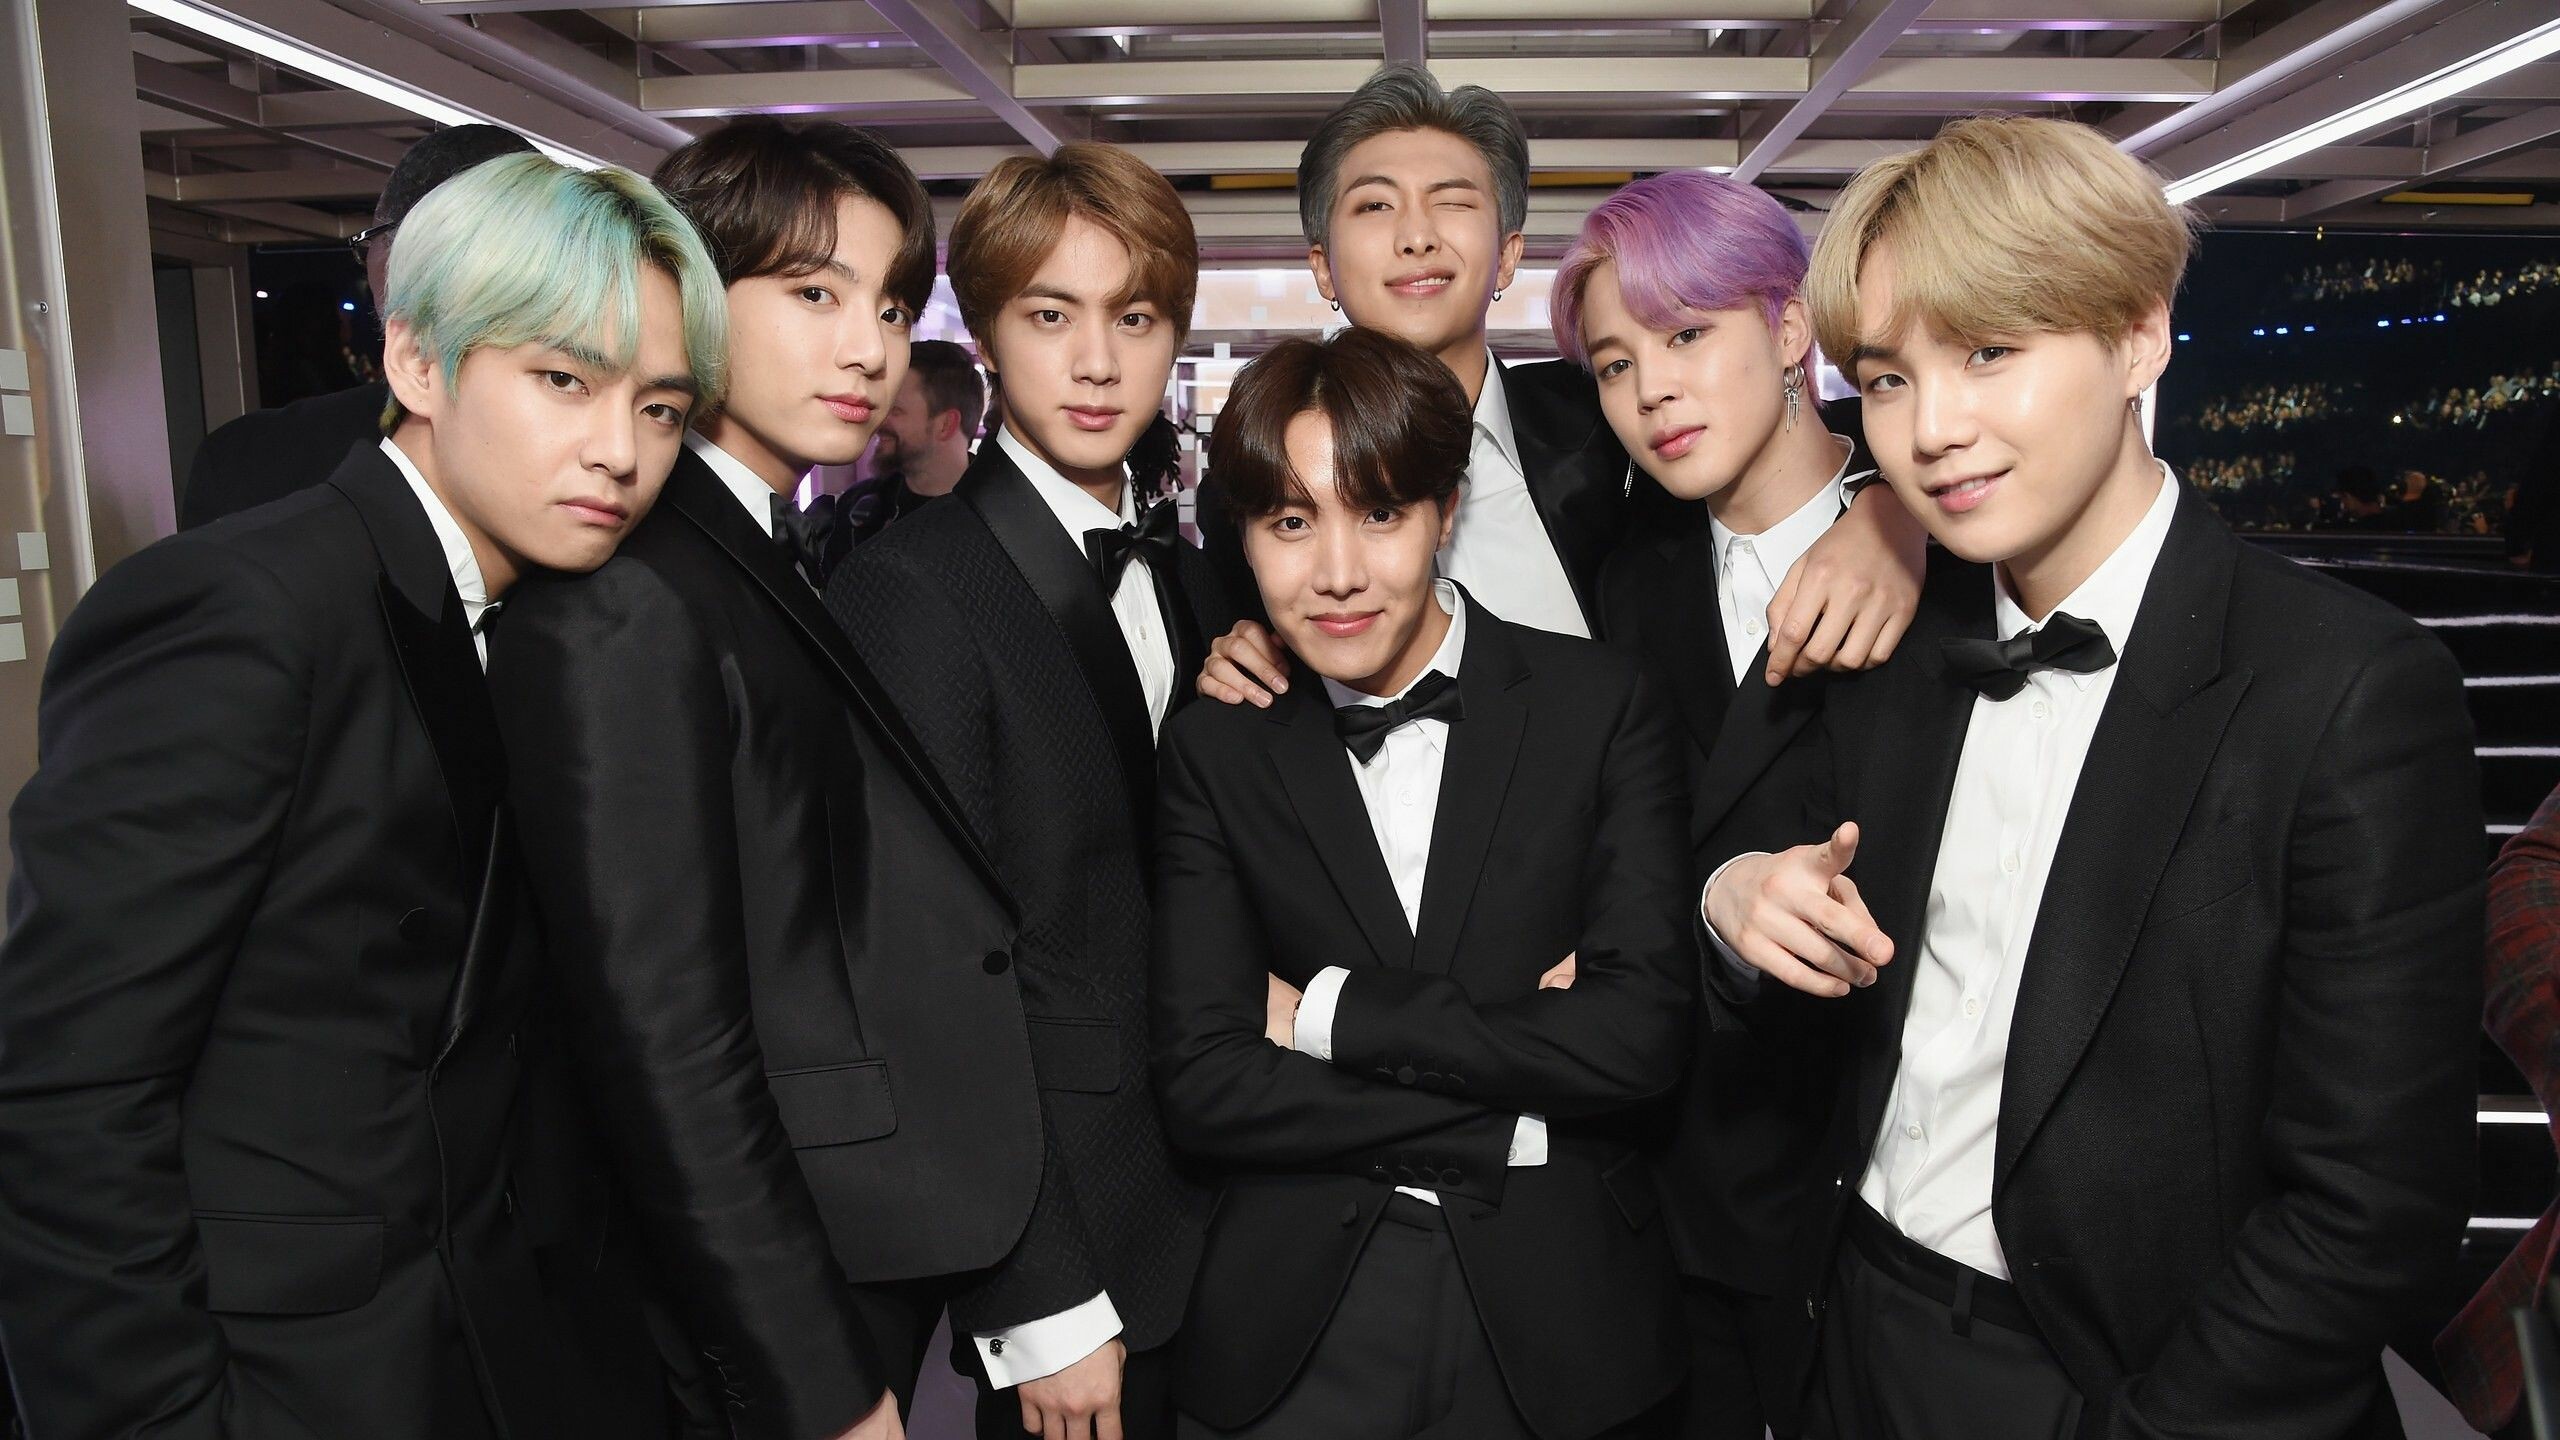 Grammys music awards, BTS performance, Memorable moments, Stage spectacle, 2560x1440 HD Desktop